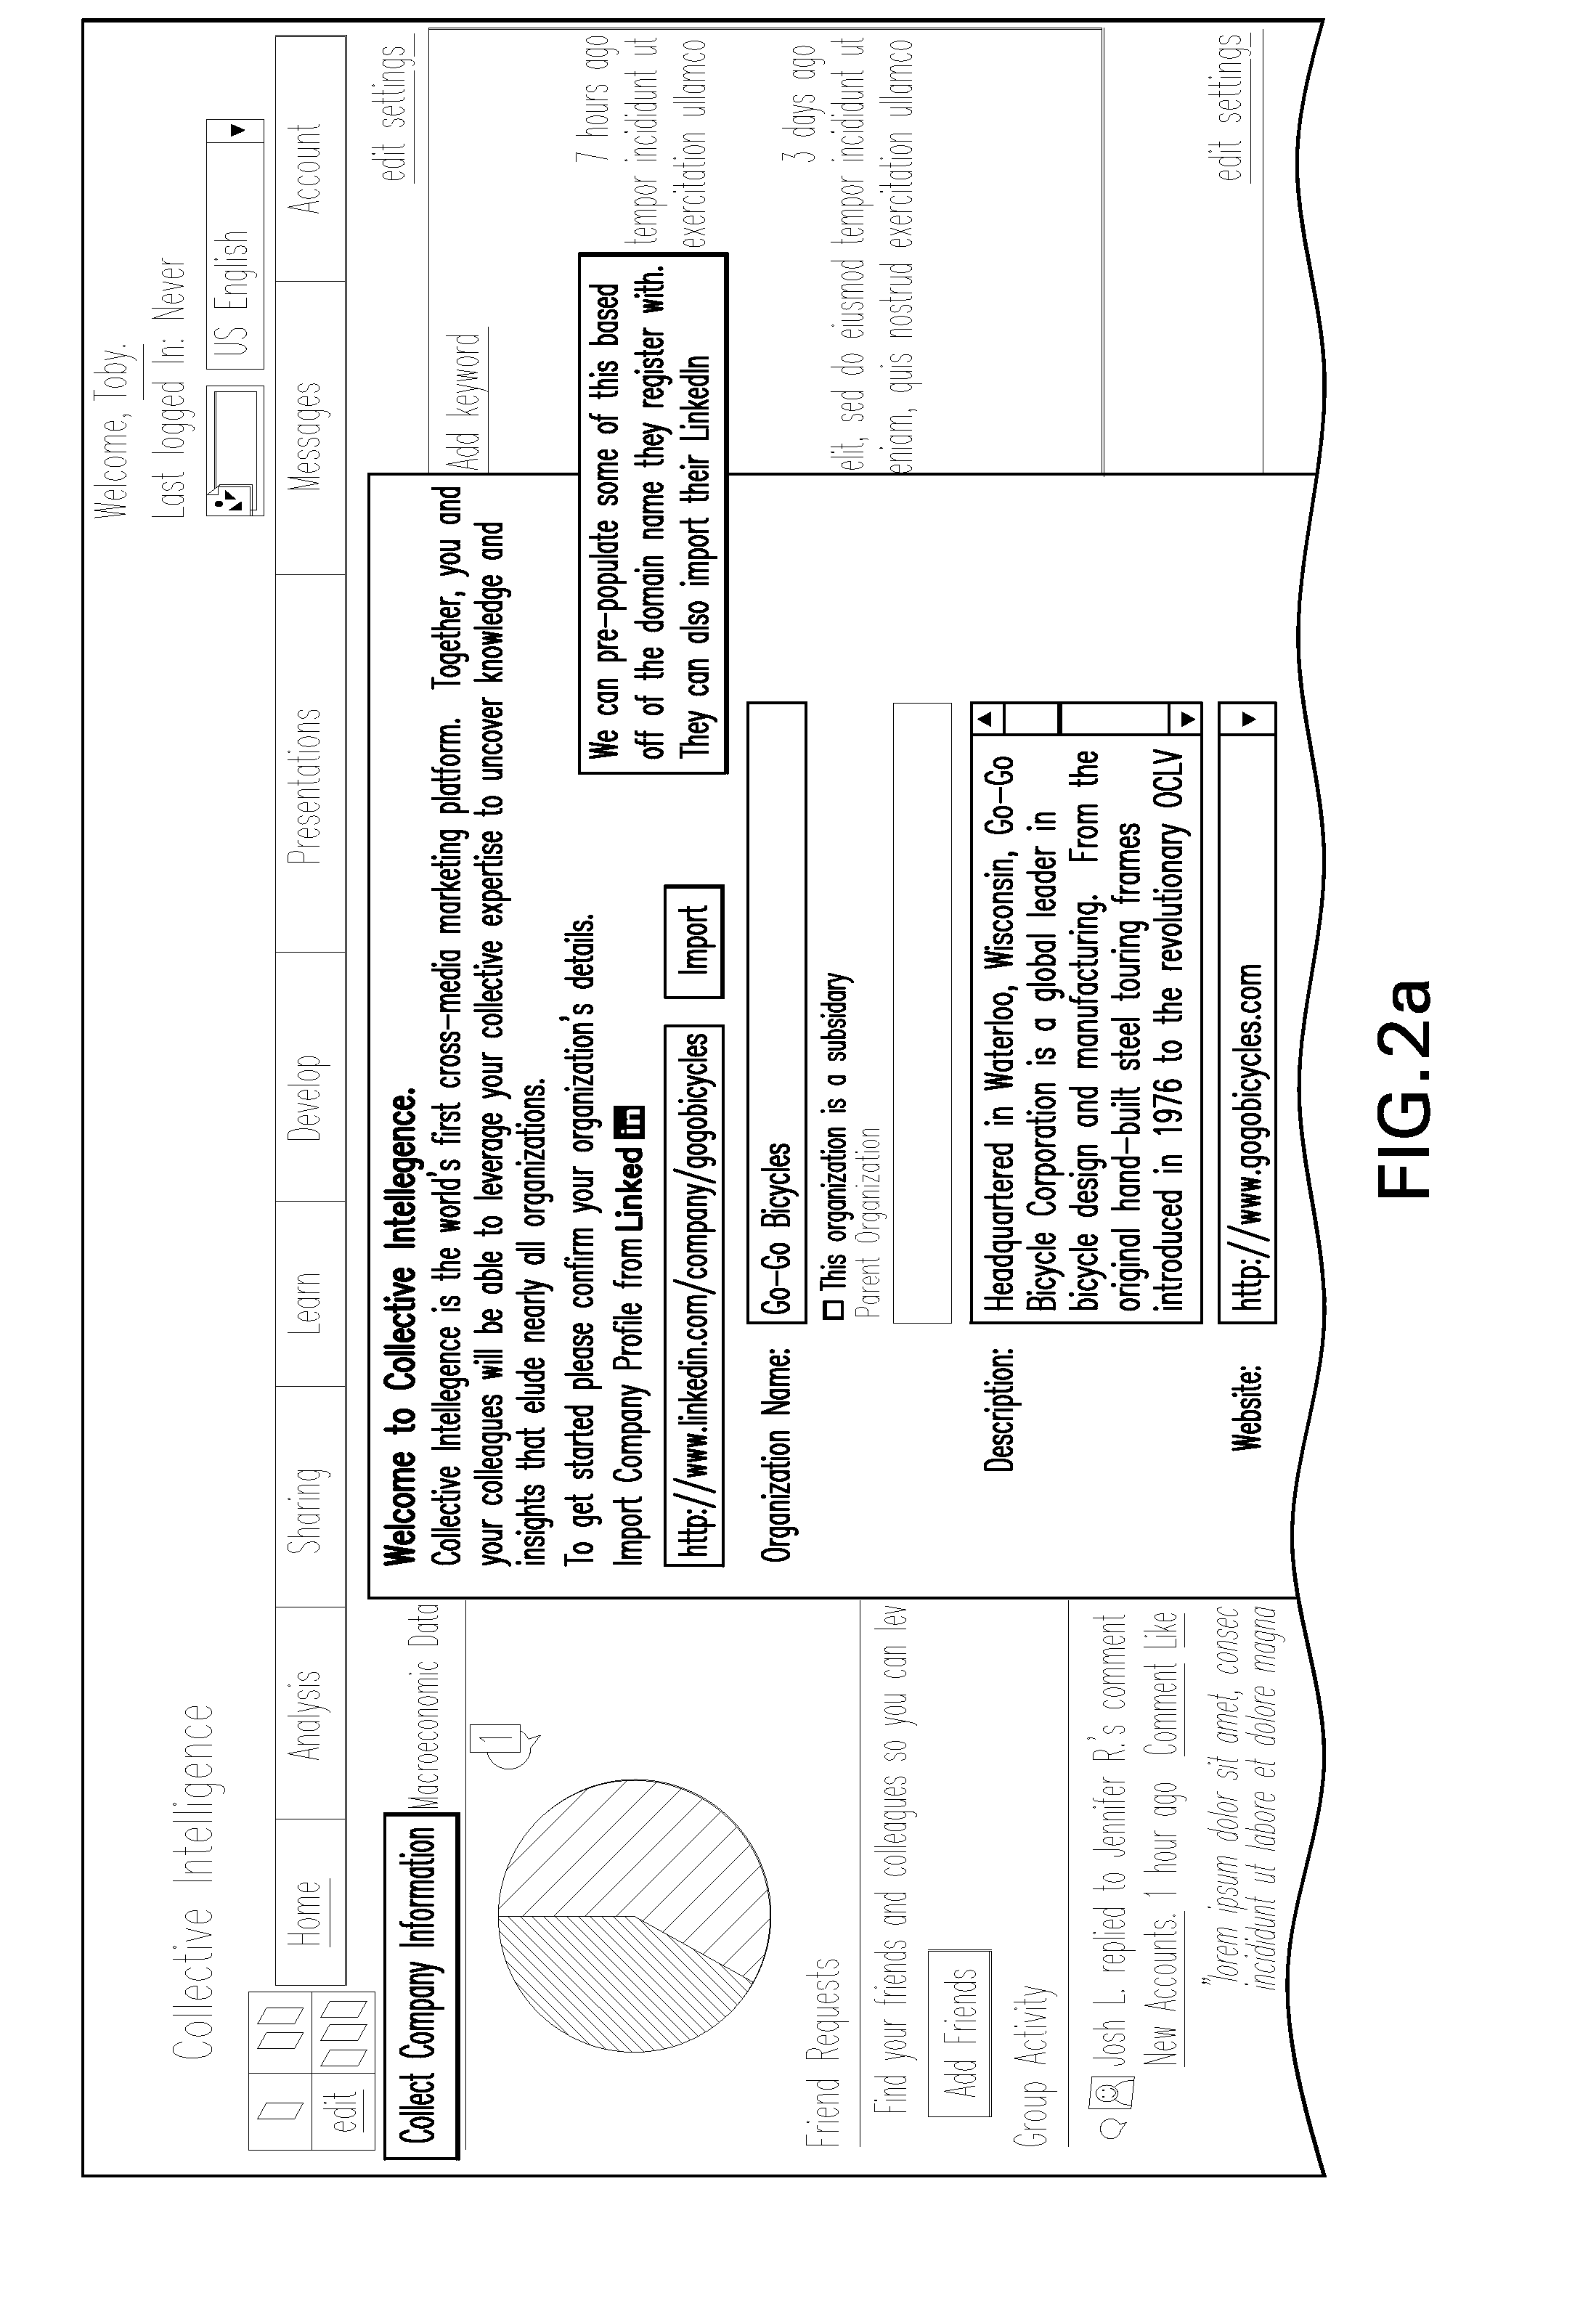 Methods and systems for enhanced data unification, access and analysis